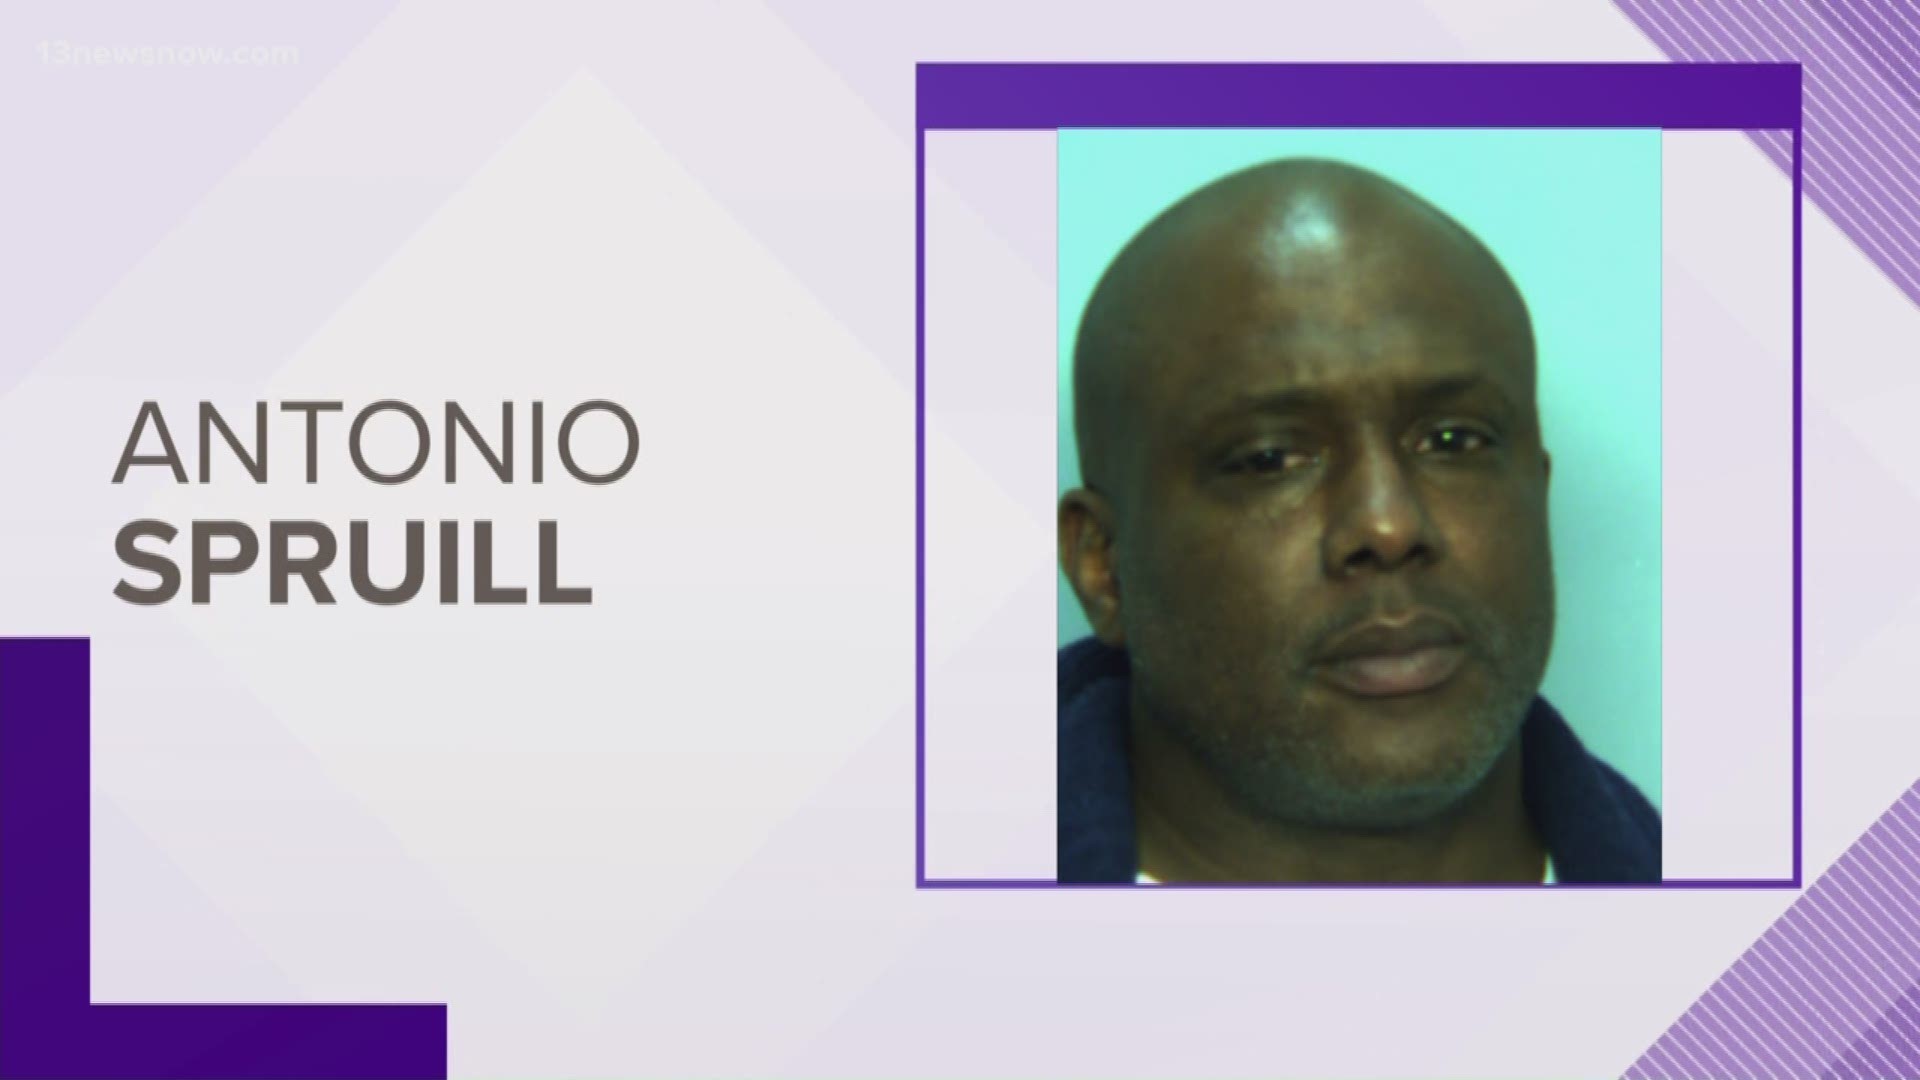 Senior Police Officer Antonio Z. Spruill was charged with misdemeanor domestic assault on March 27.